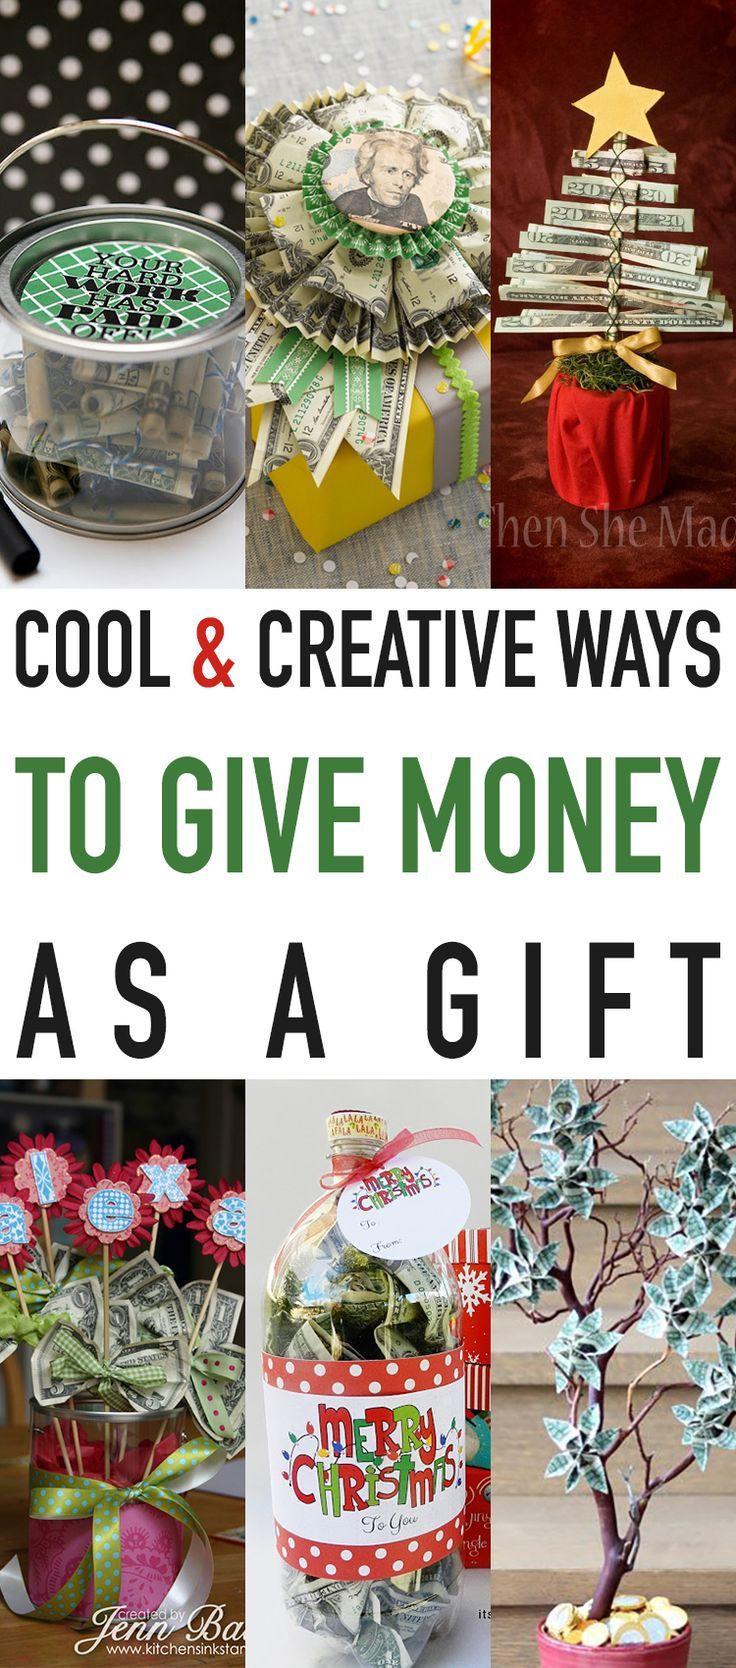 Cool Holiday Gift Ideas
 Cool and Creative Ways To Give Money As A Gift